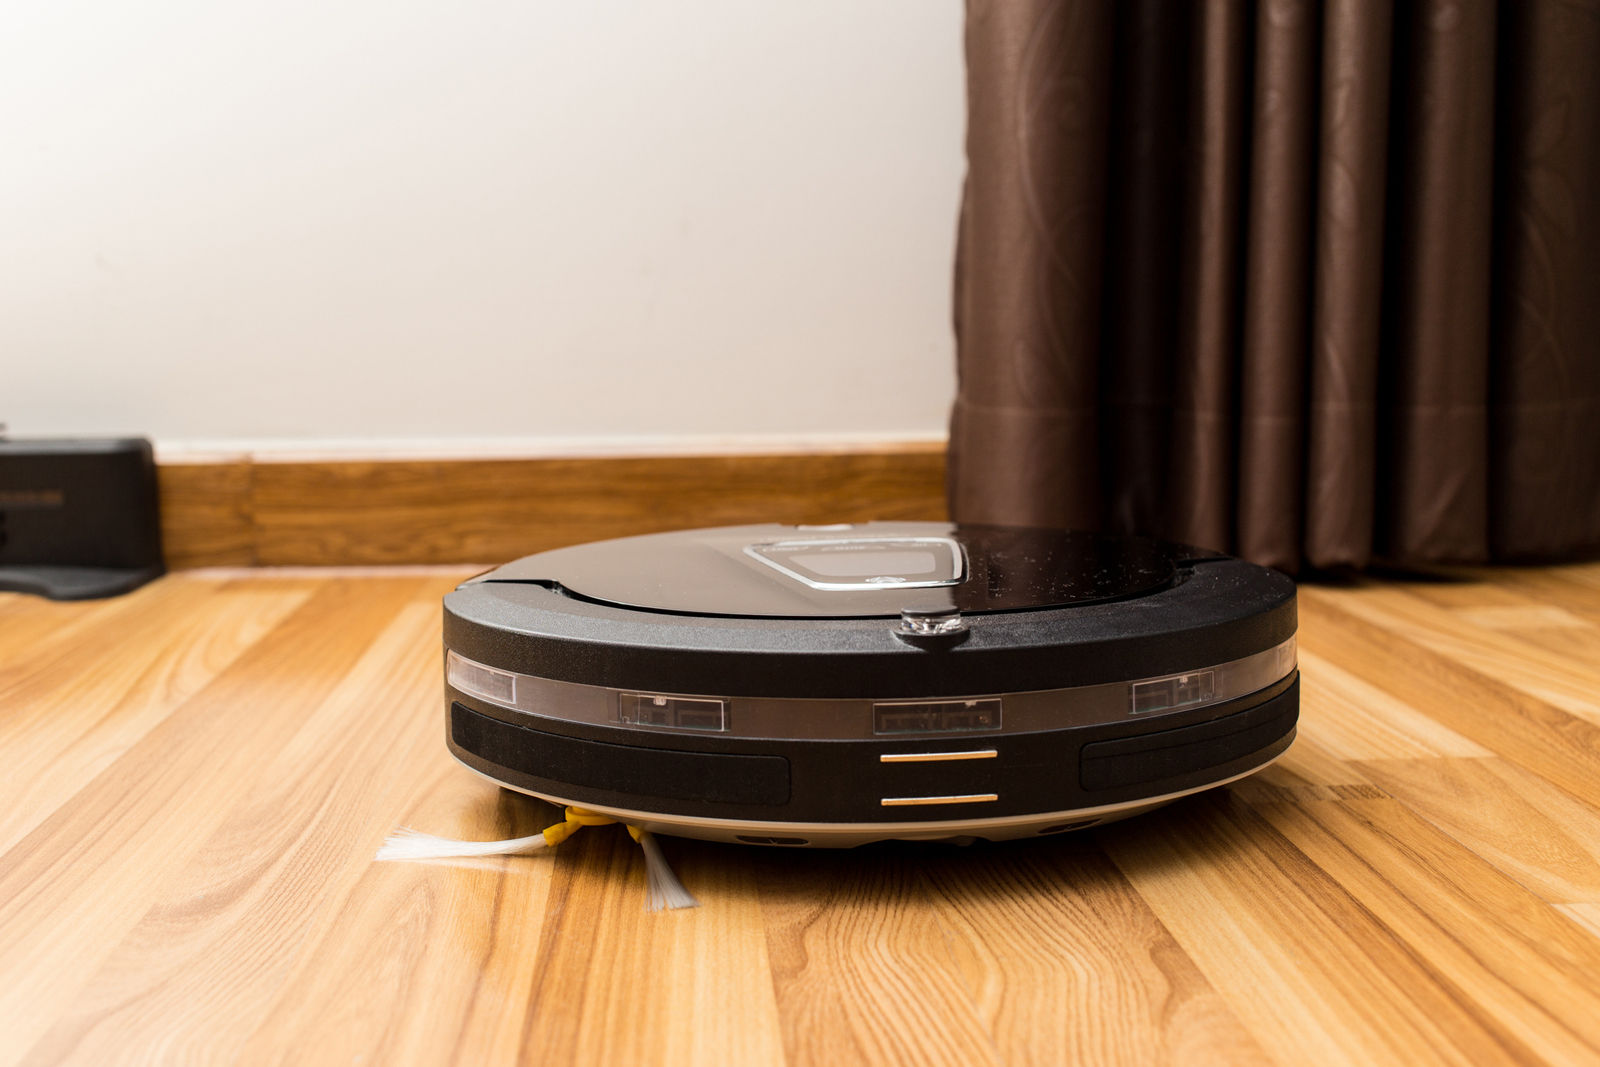 Column: How to privacy on a Roomba - WTOP News